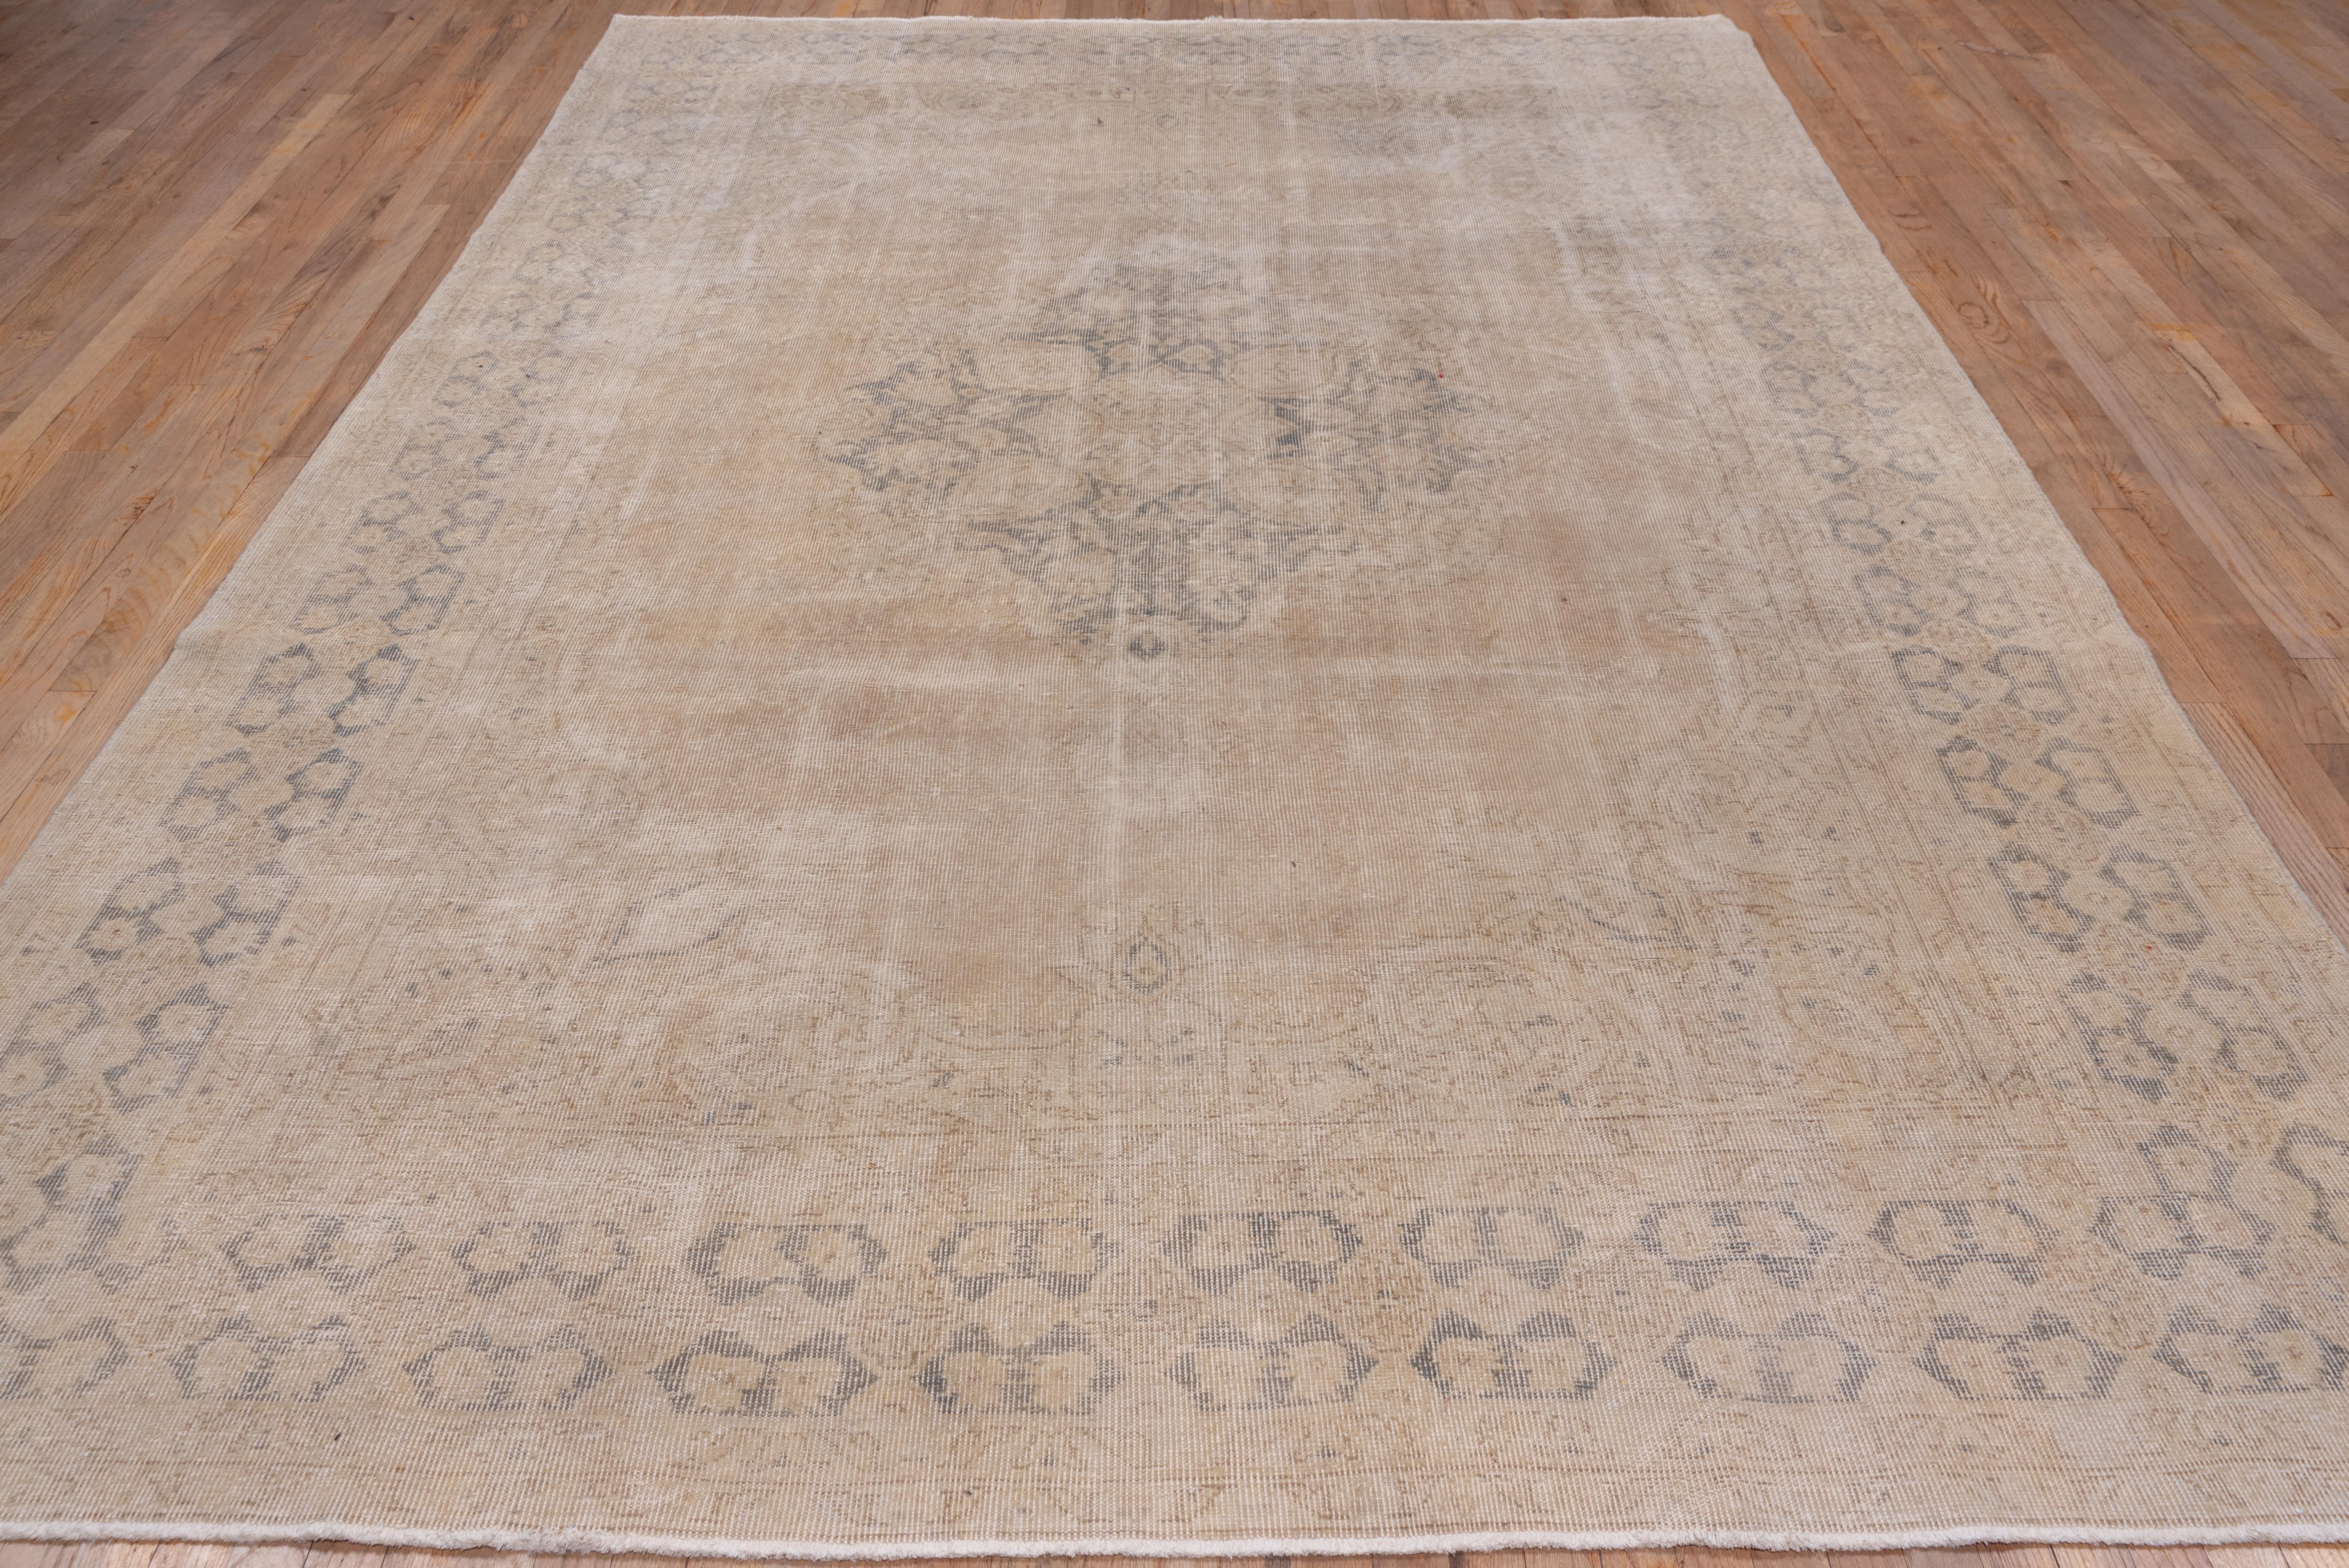 This western Turkish workshop carpet is in worn to distressed condition. The oval brown medallion centres the sandy beige field with acanthus arabesque corners. The brown main border shows a chain of rosettes-in-hexagons in a figure-ground color